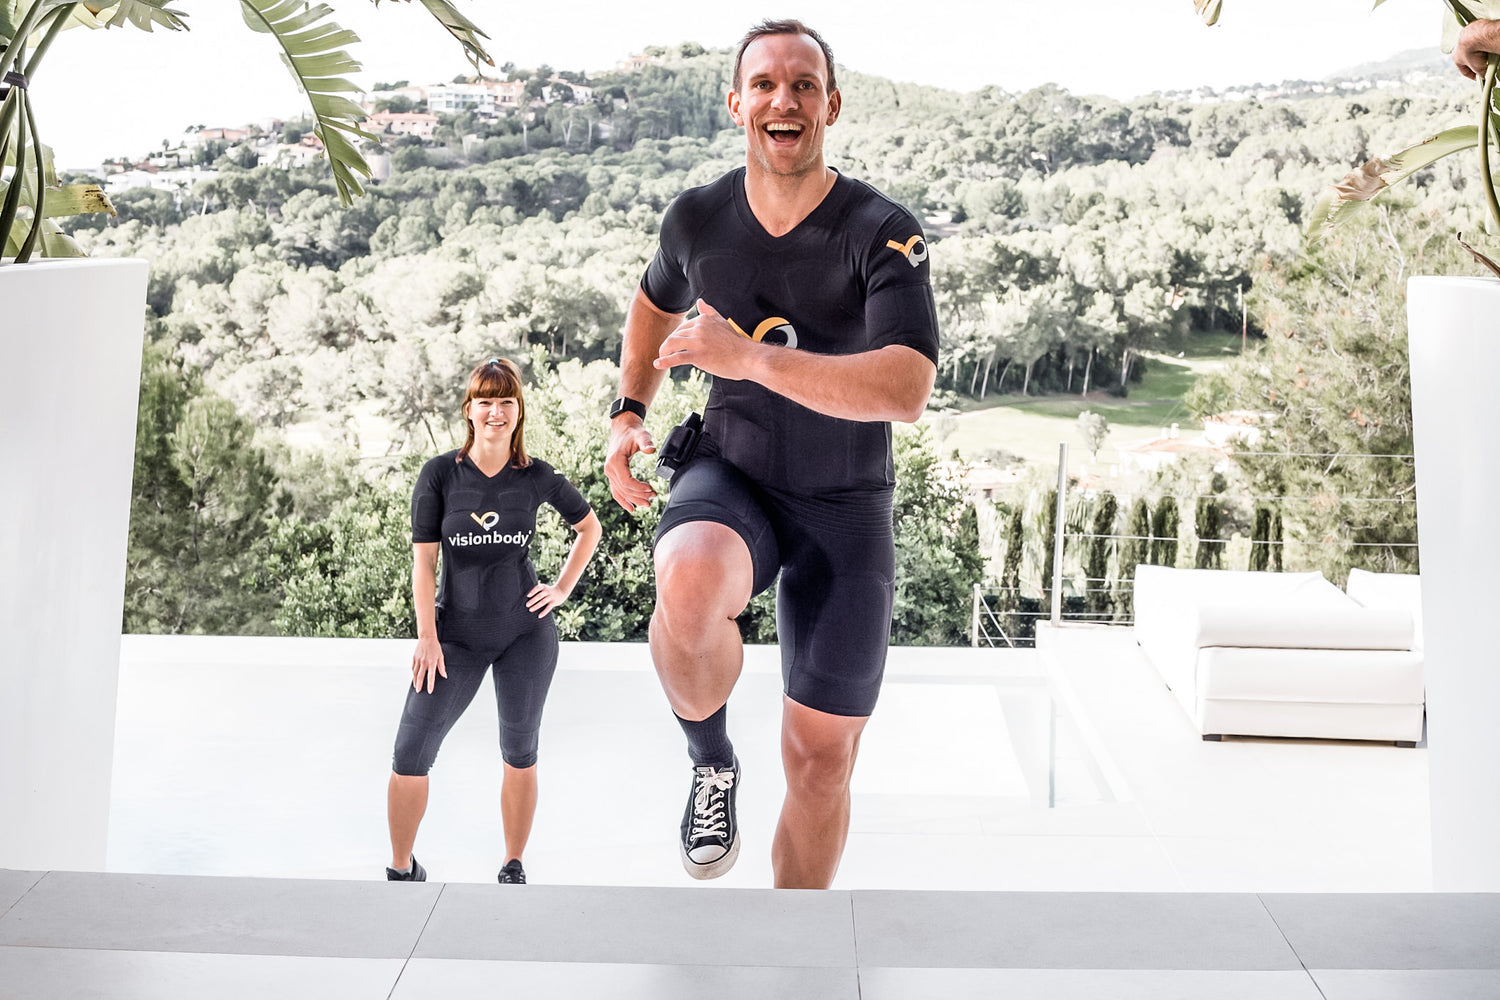 Mallorca Speedfitness offers clients the luxury of personalized health and wellness from the comfort and safety of their home or semi-private facility. Every client’s goals are assessed in depth by our staff.